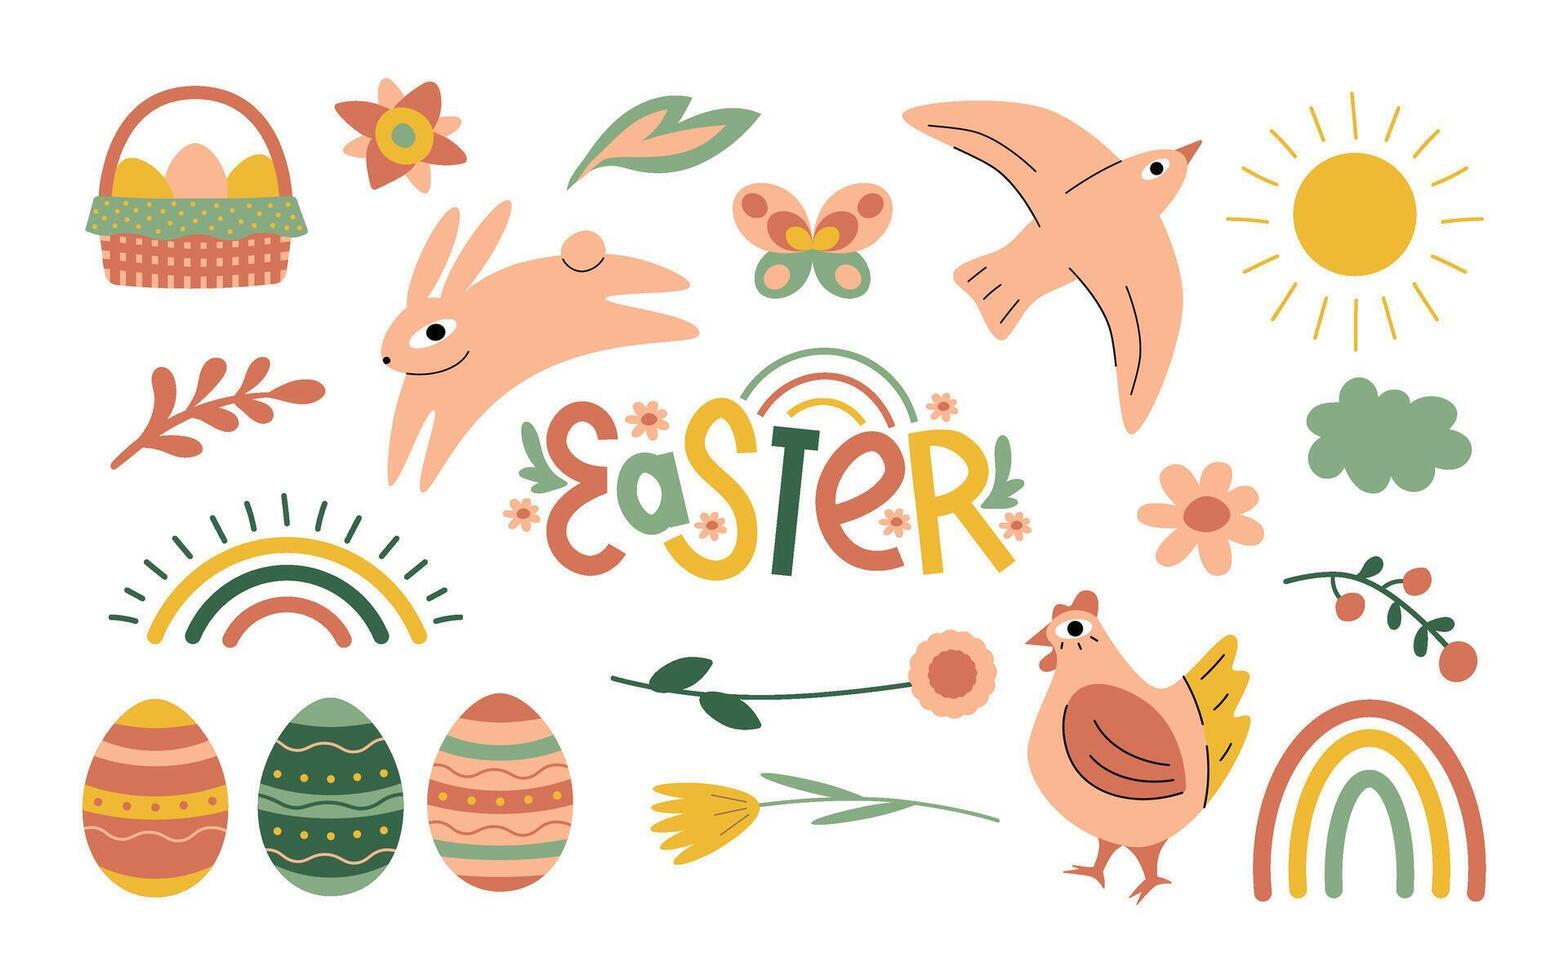 Cute Easter set. Spring collection of animals, plants, flowers and decorations. For cards, posters, prints, scrapbooking vector